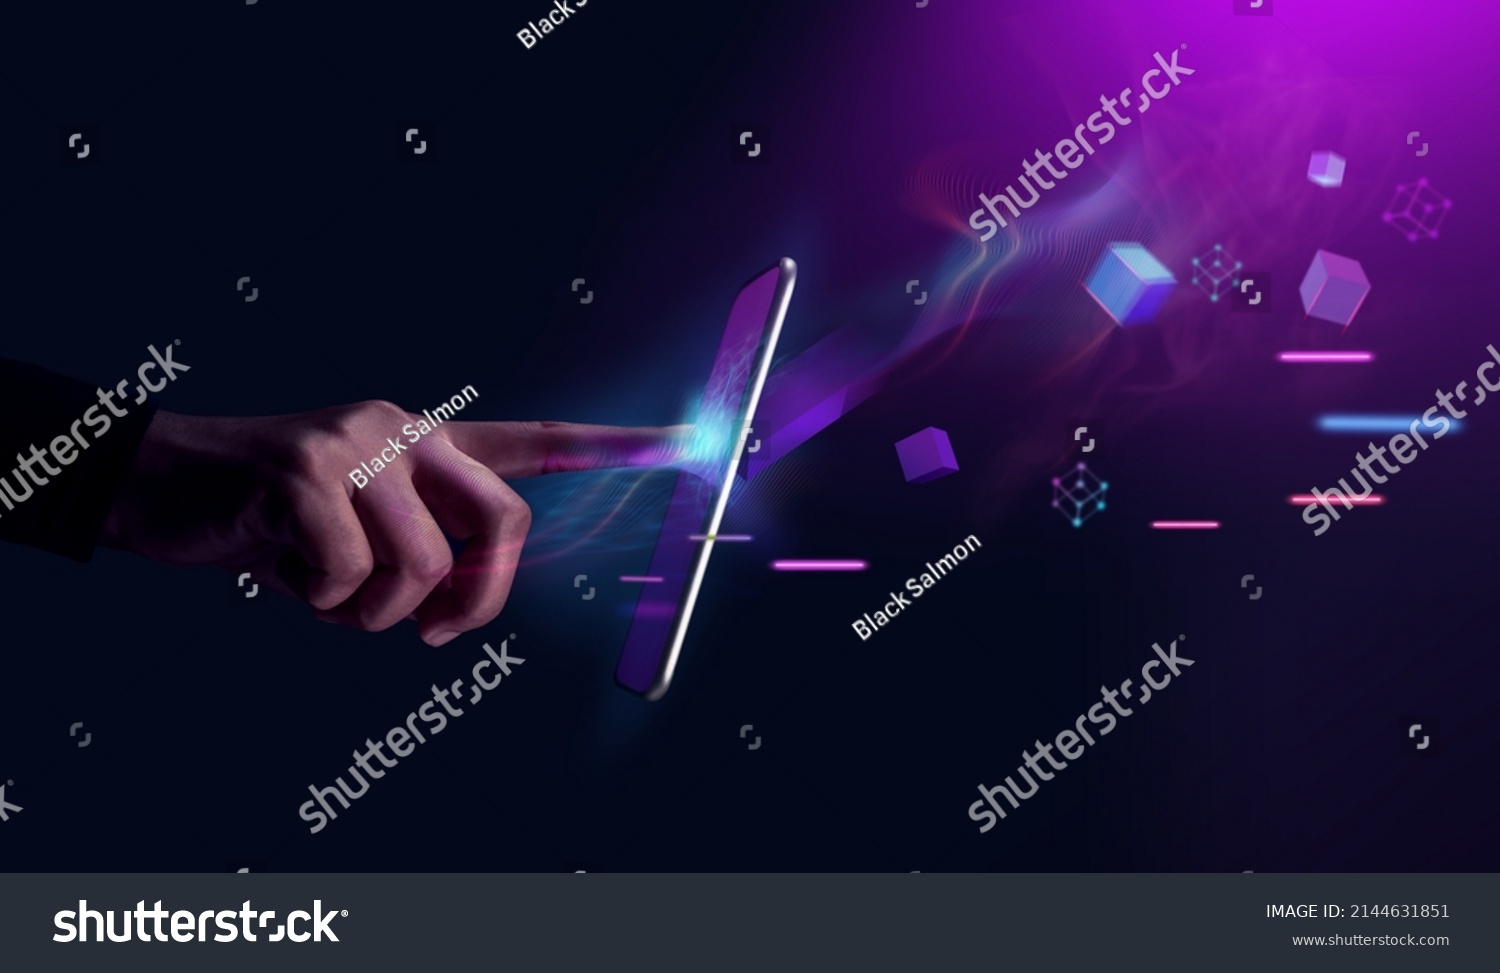 Metaverse and Blockchain Technology Concepts. Person with an Experiences of Metaverse Virtual World via Smart Phone. Futuristic Tone. Conceptual Photo #2144631851